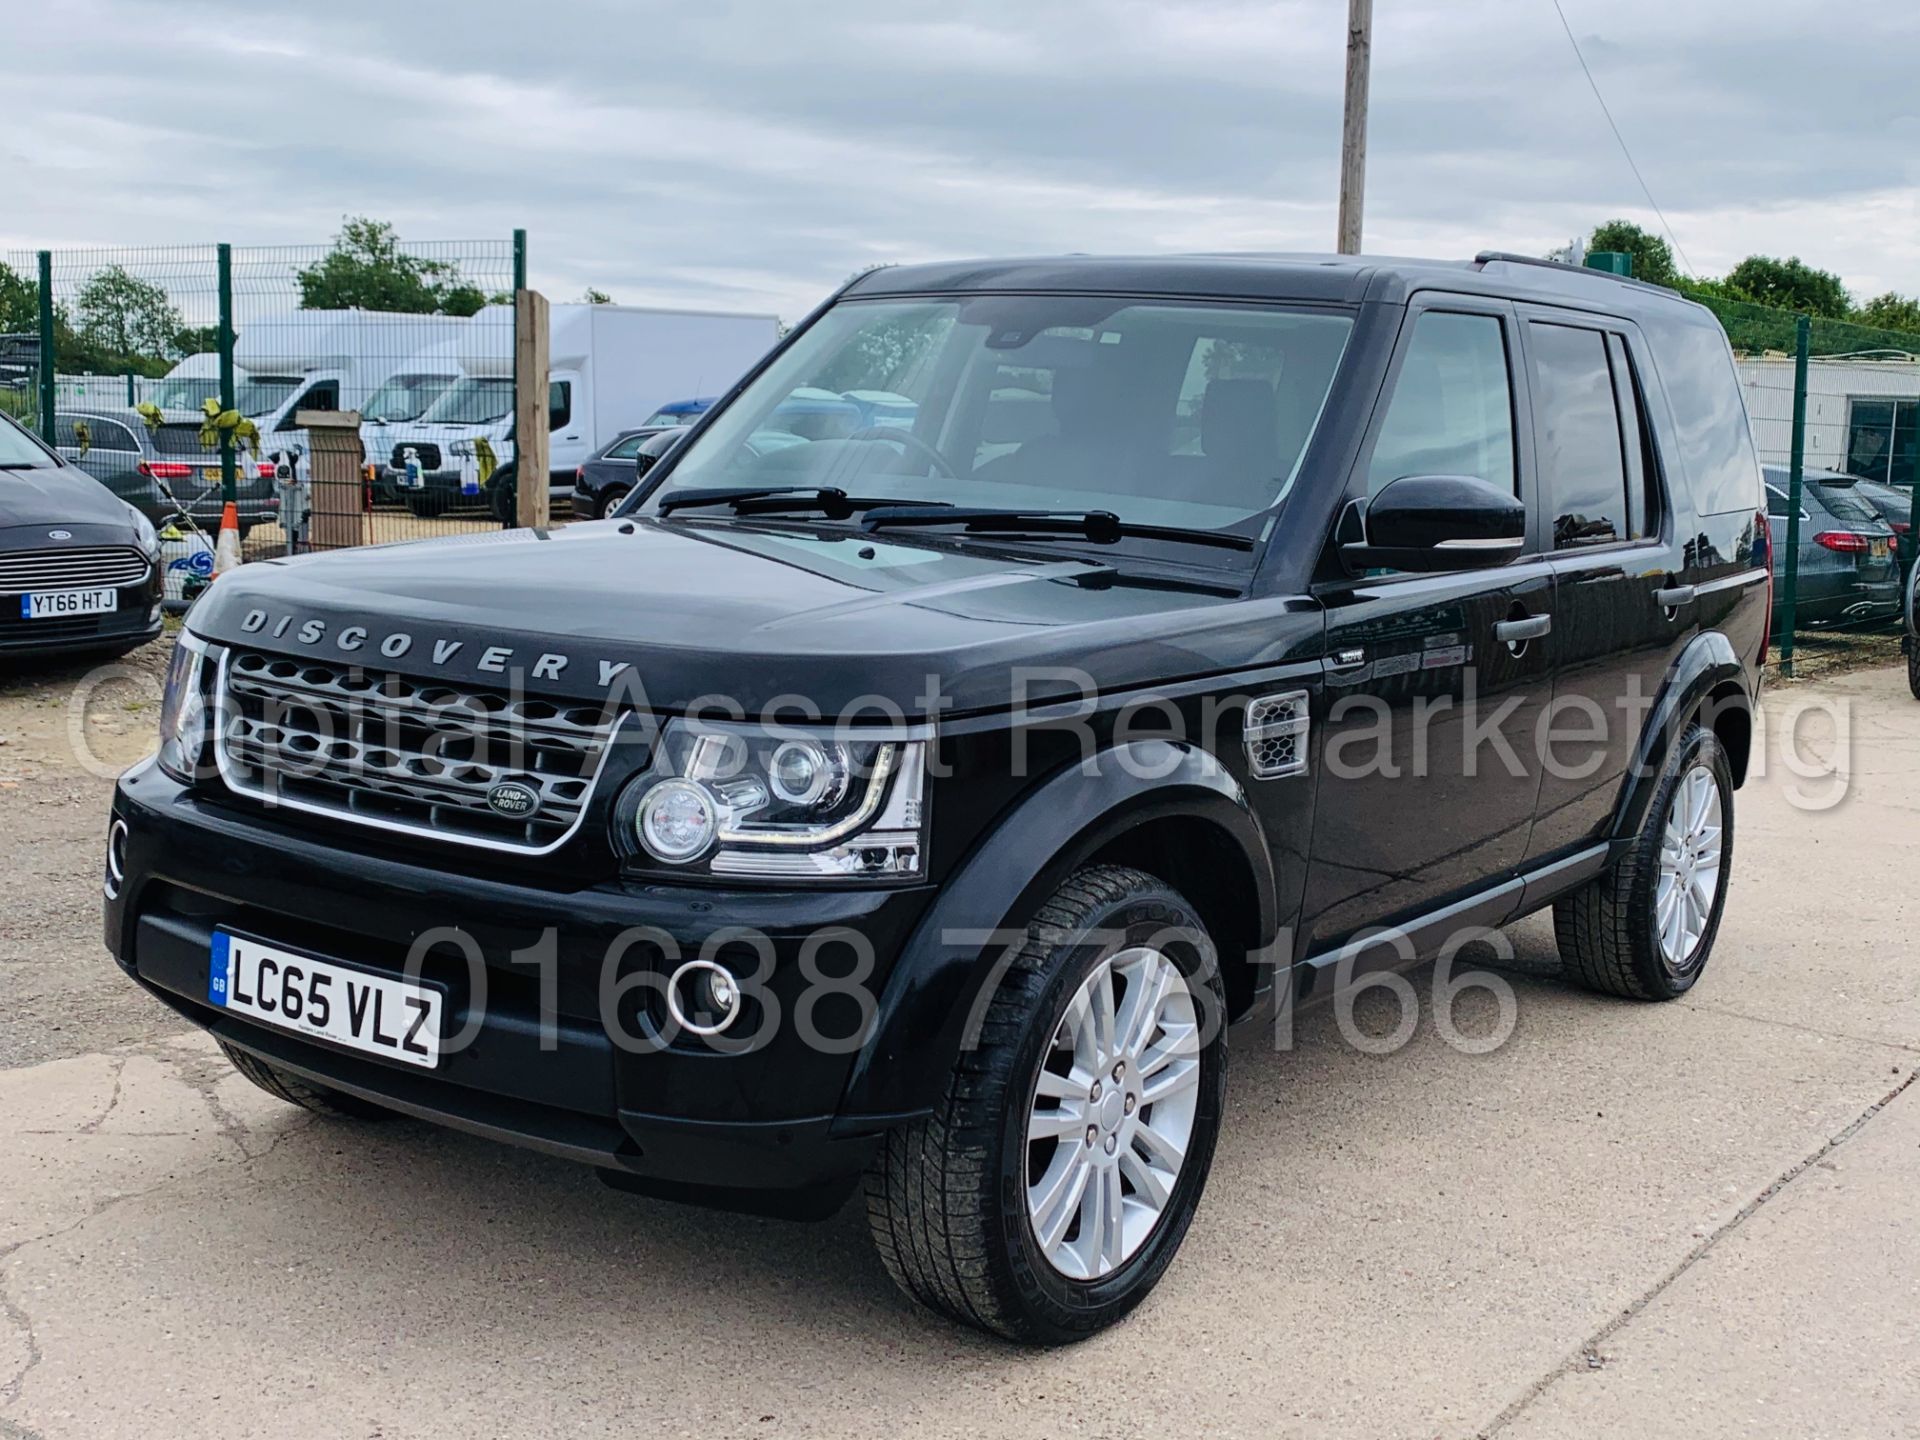 (On Sale) LAND ROVER DISCOVERY 4 *SE TECH* 7 SEATER SUV (2016) '3.0 SDV6 - 8 SPEED AUTO' (1 OWNER) - Image 5 of 53